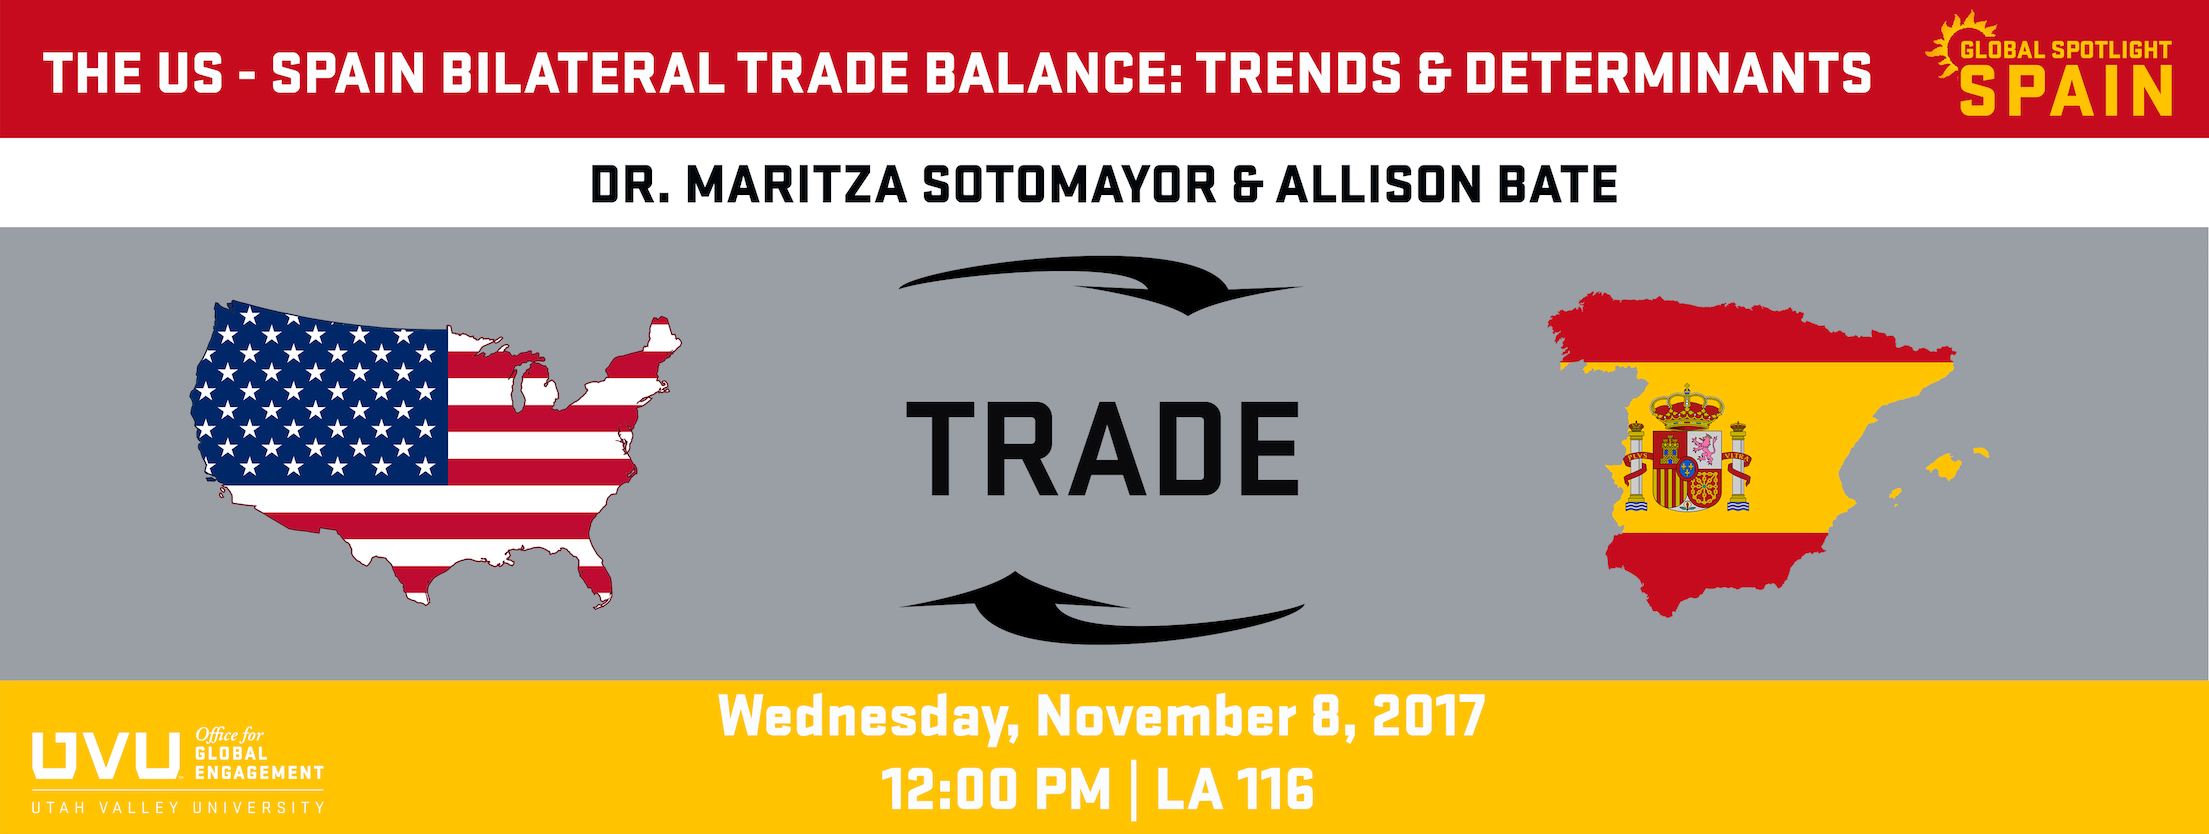 Trade Banner. Image of circular arrows around the word trade in between depictions of the U.S. and Spain. Text on the image says: The US - Spain Bilateral Trade Balance: Trends & Determinants. Wednesday, November 8, 2017. 12:00 PM | LA 116